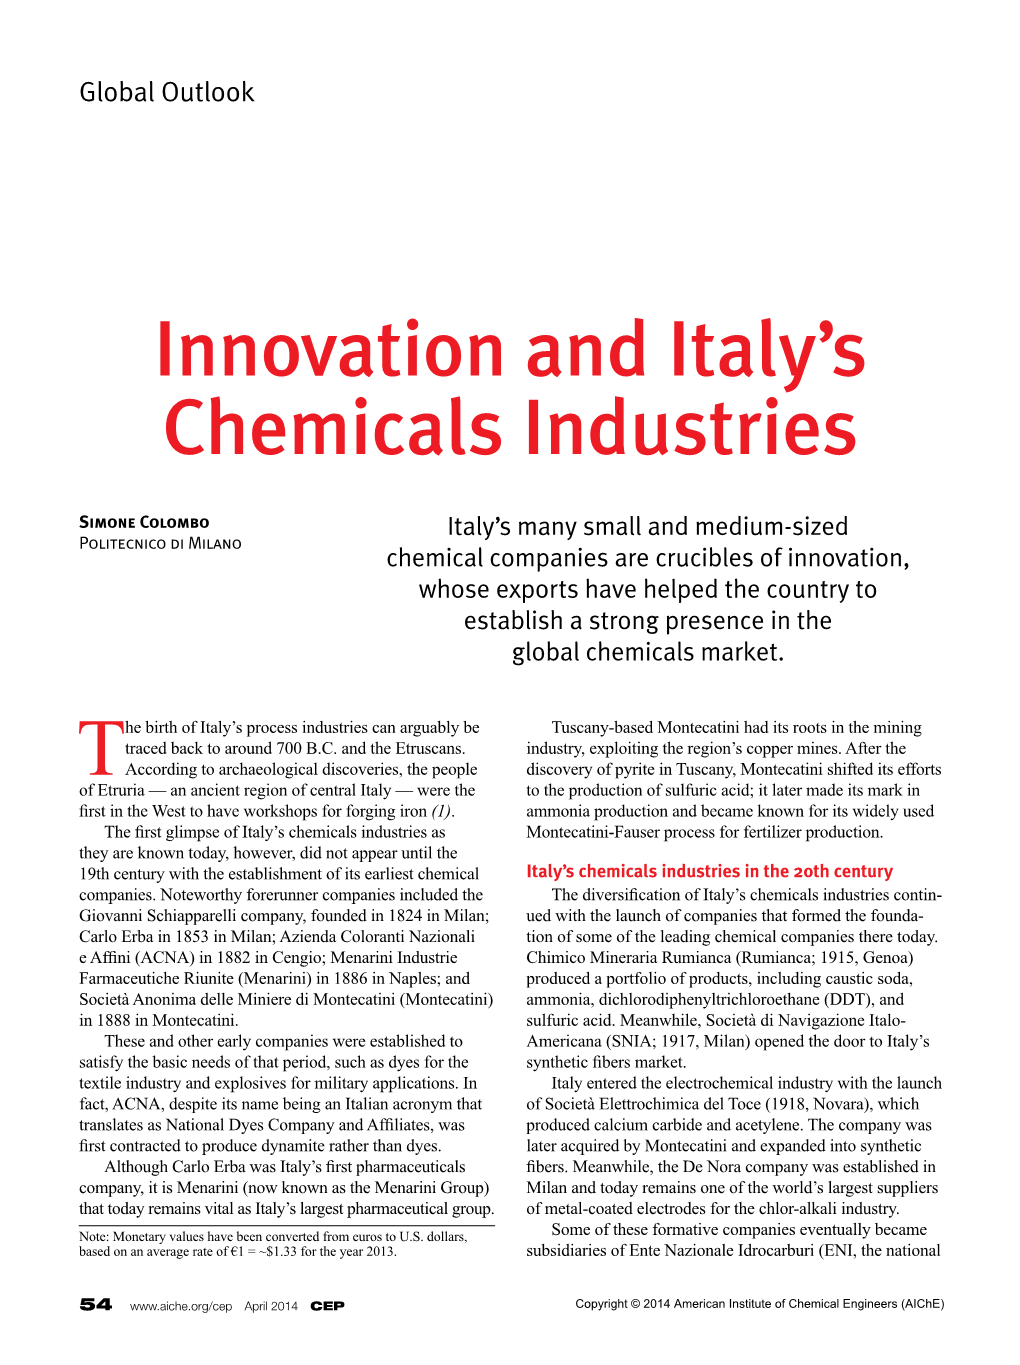 Innovation and Italy's Chemicals Industries